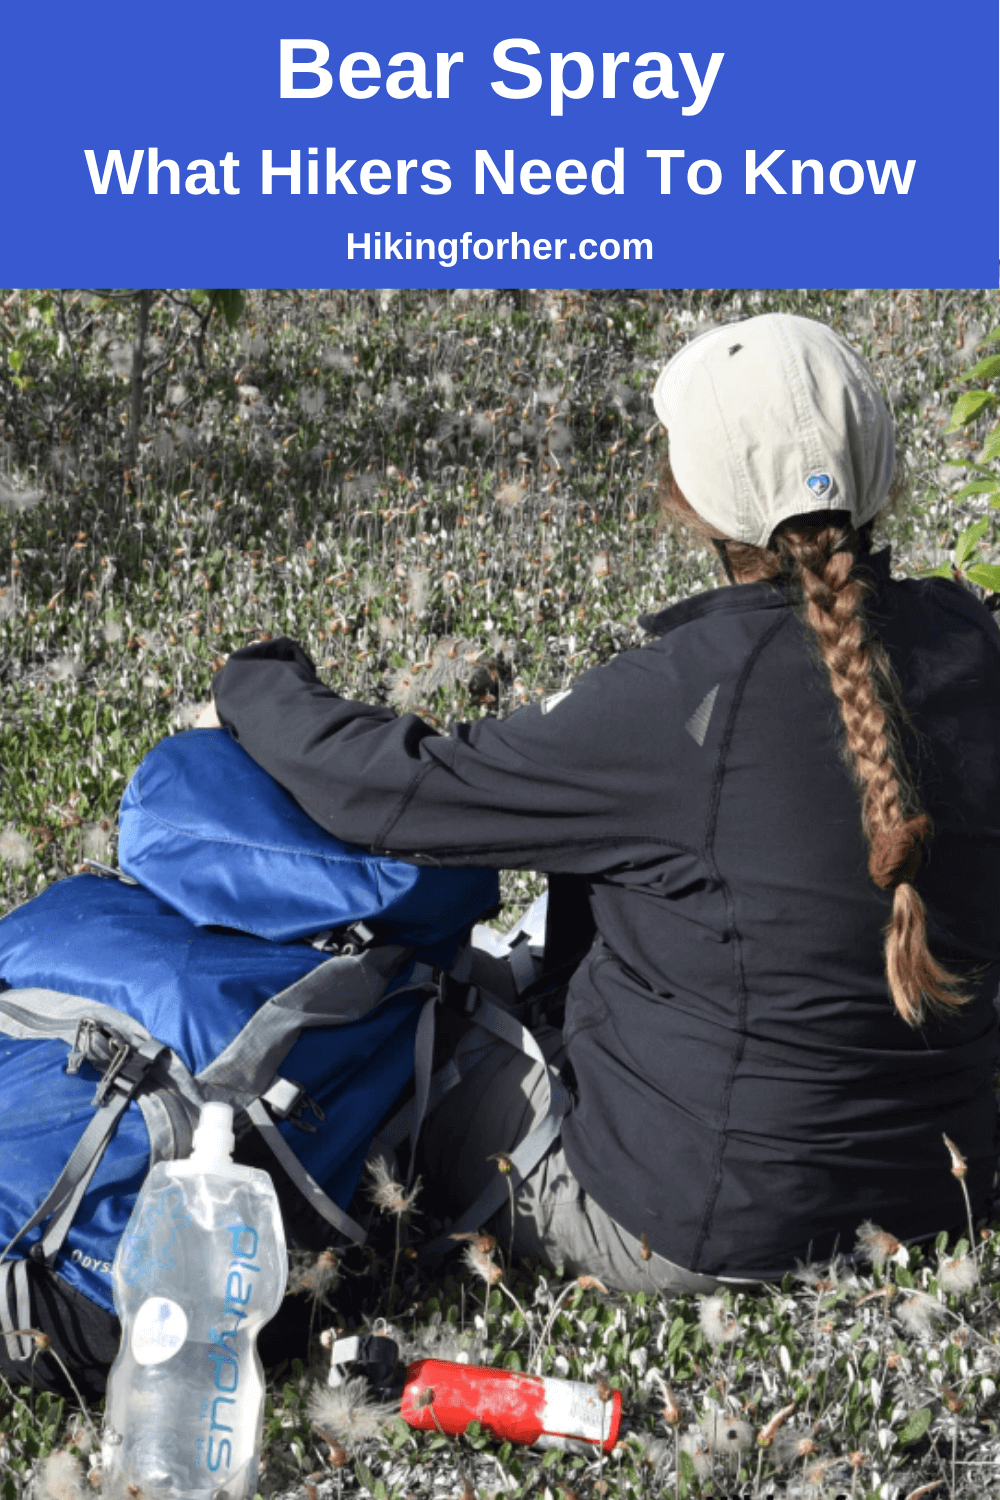 Wondering about when and how to use bear spray on a hike through bear territory? Hiking For Her explains what you need to know. #bearspray #hikingtips #outdoorsafety #hikingforher